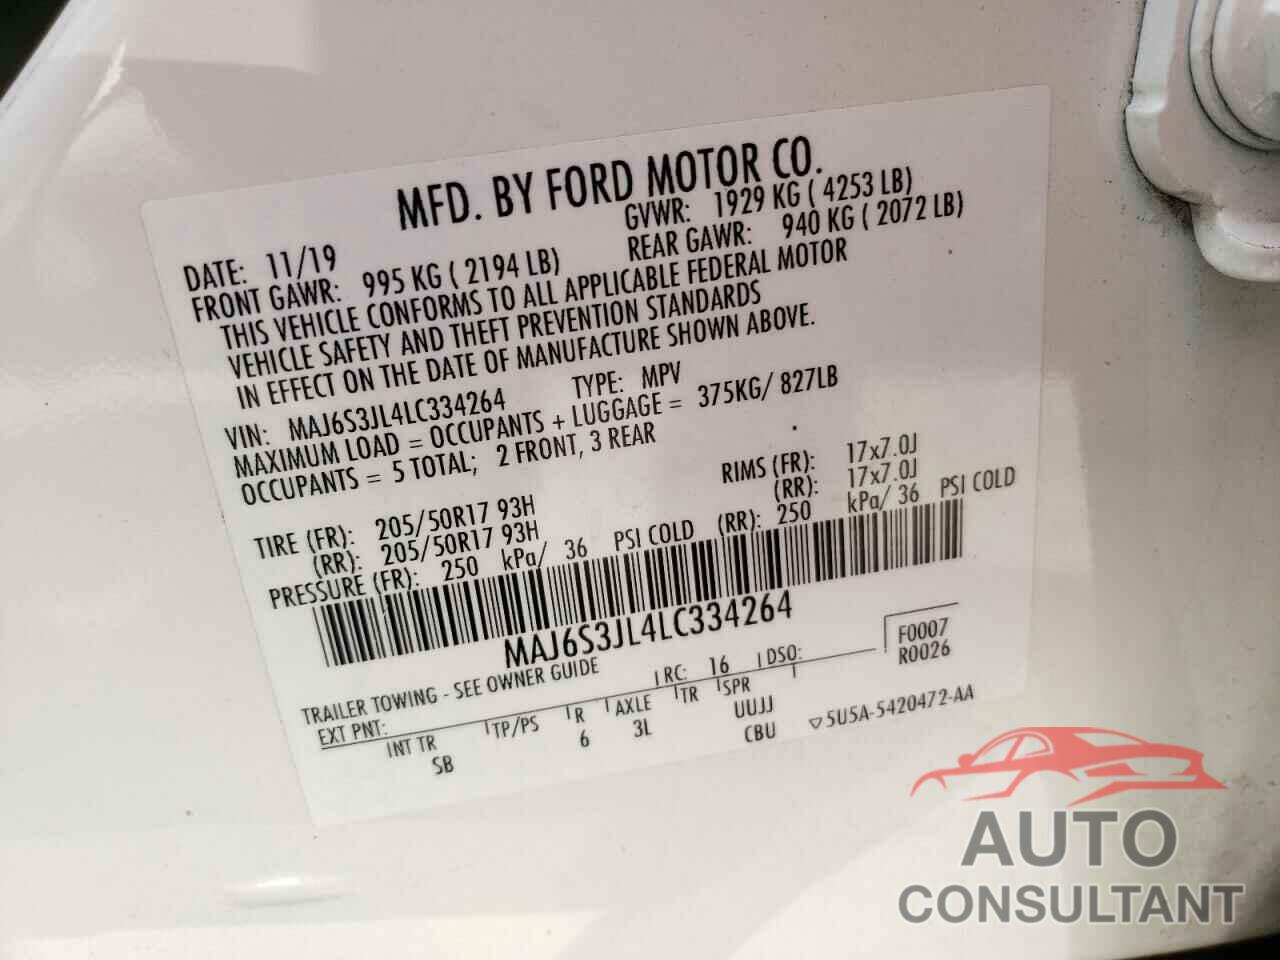 FORD ALL OTHER 2020 - MAJ6S3JL4LC334264